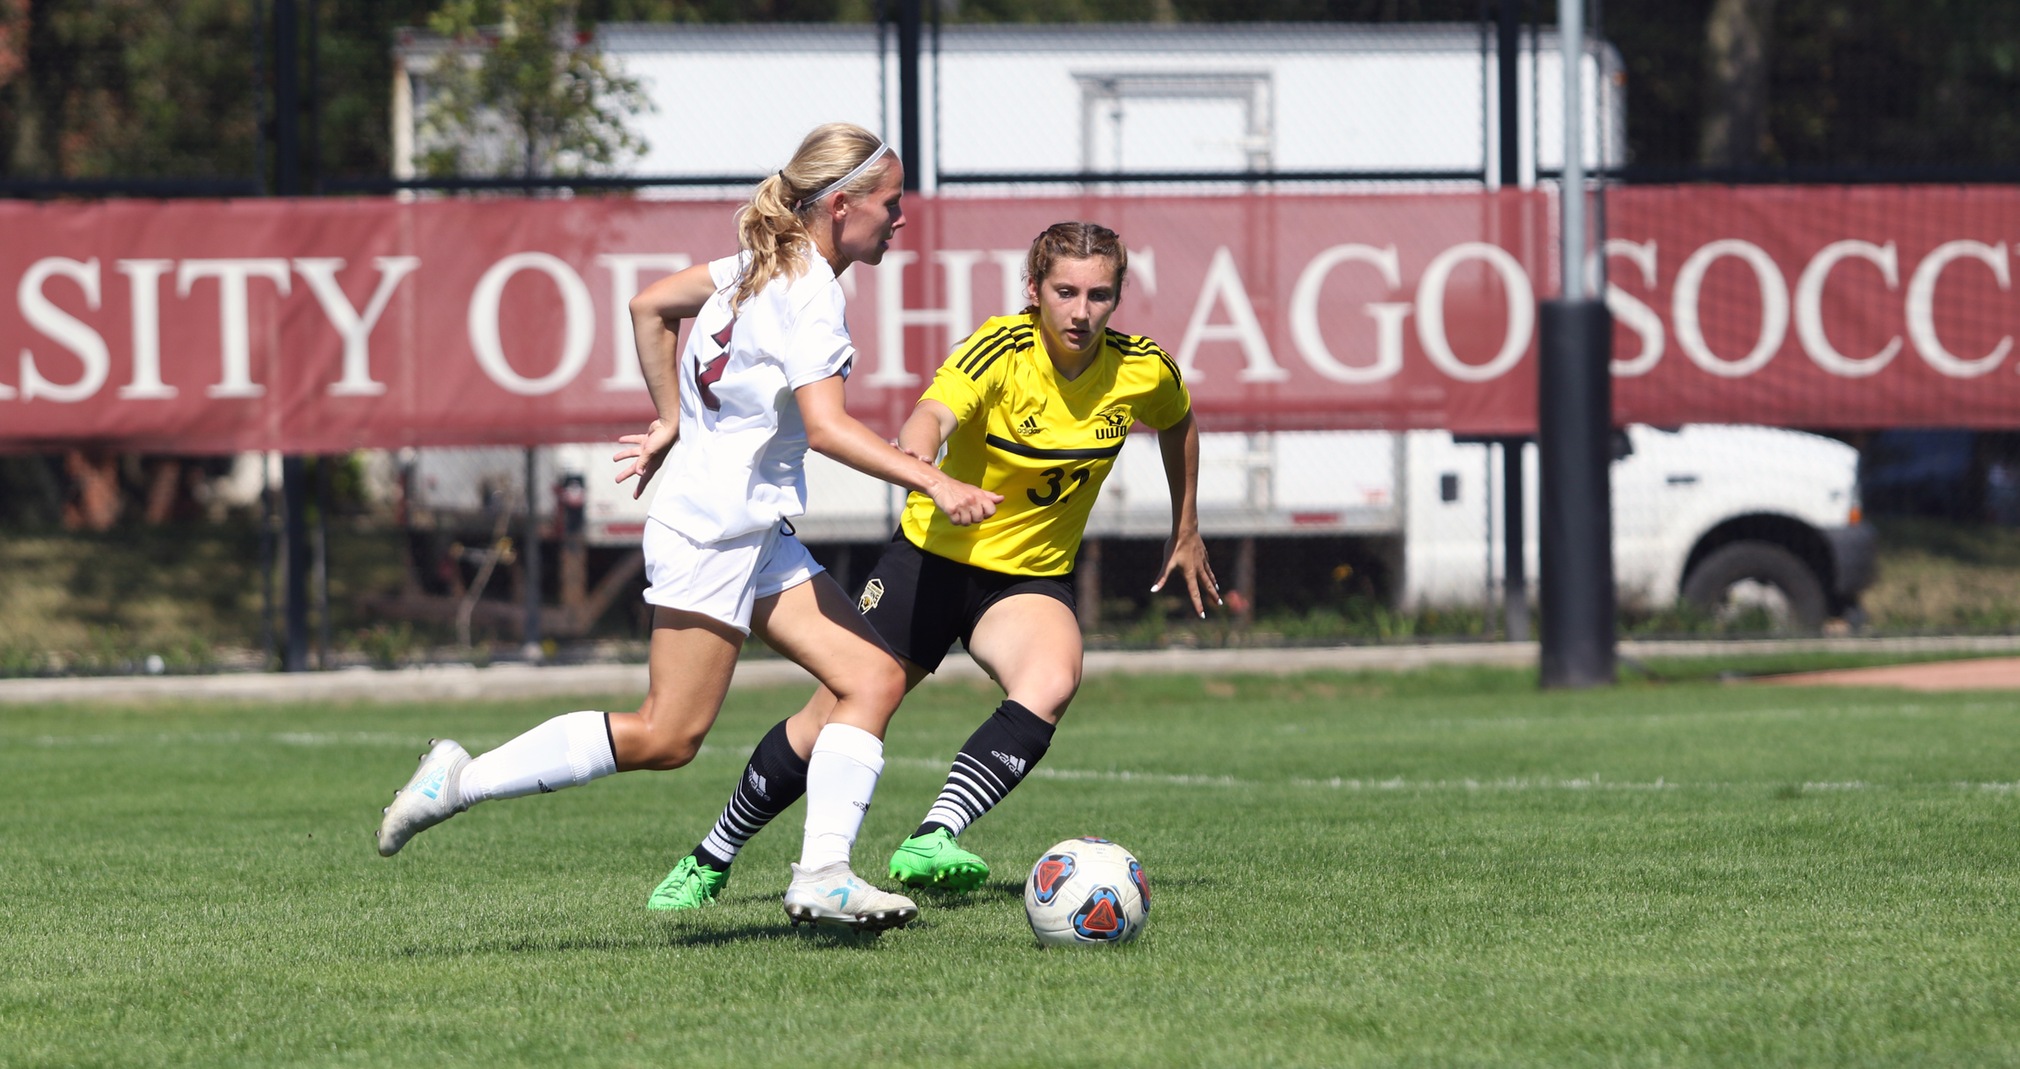 The Titans' Mackenzie Bennett attempts to stop a University of Chicago possession.